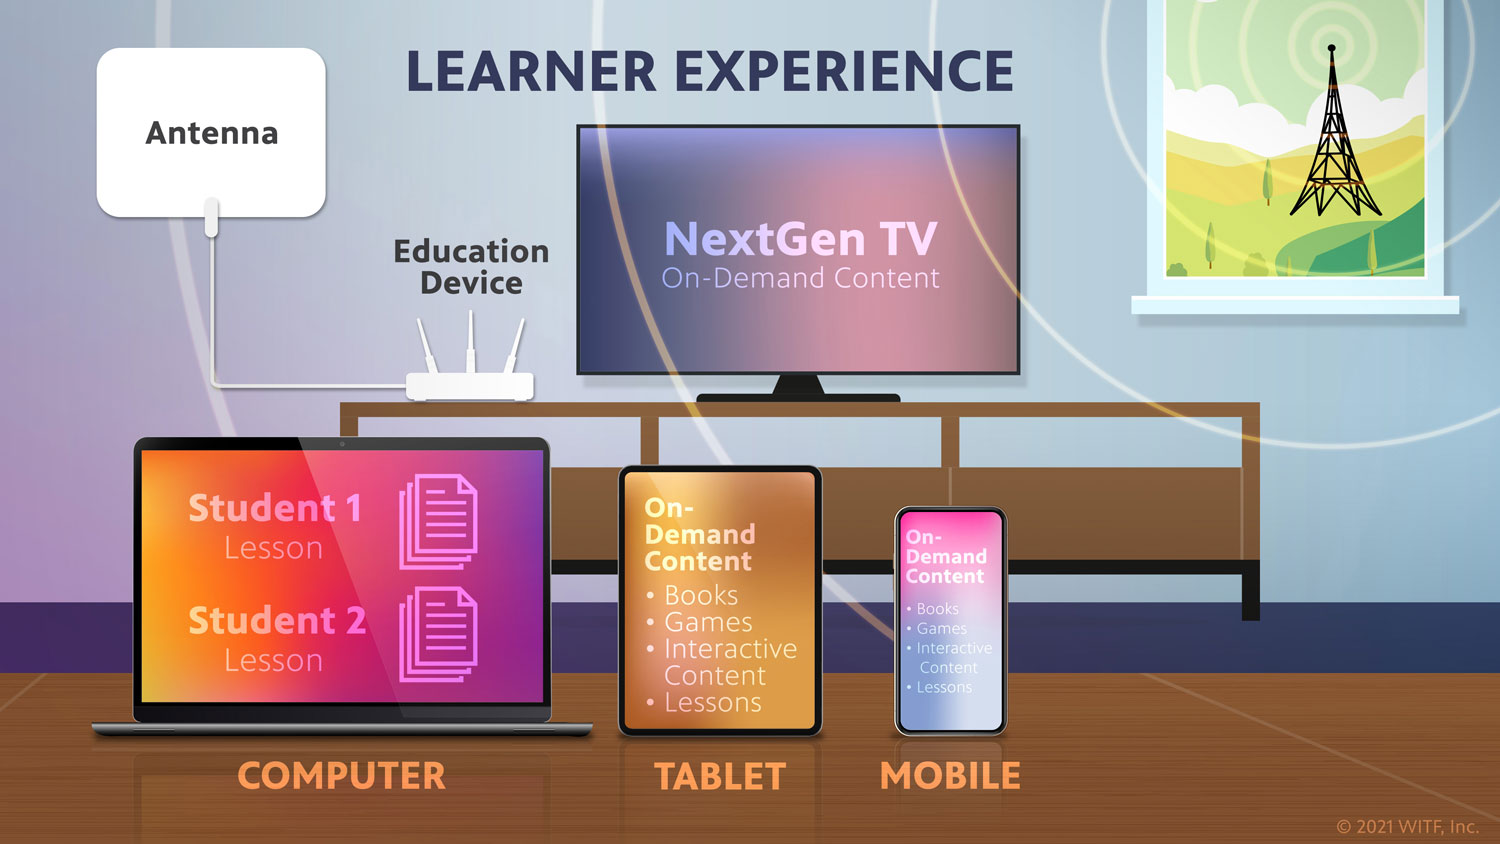 Image of the learning experience using datacasting